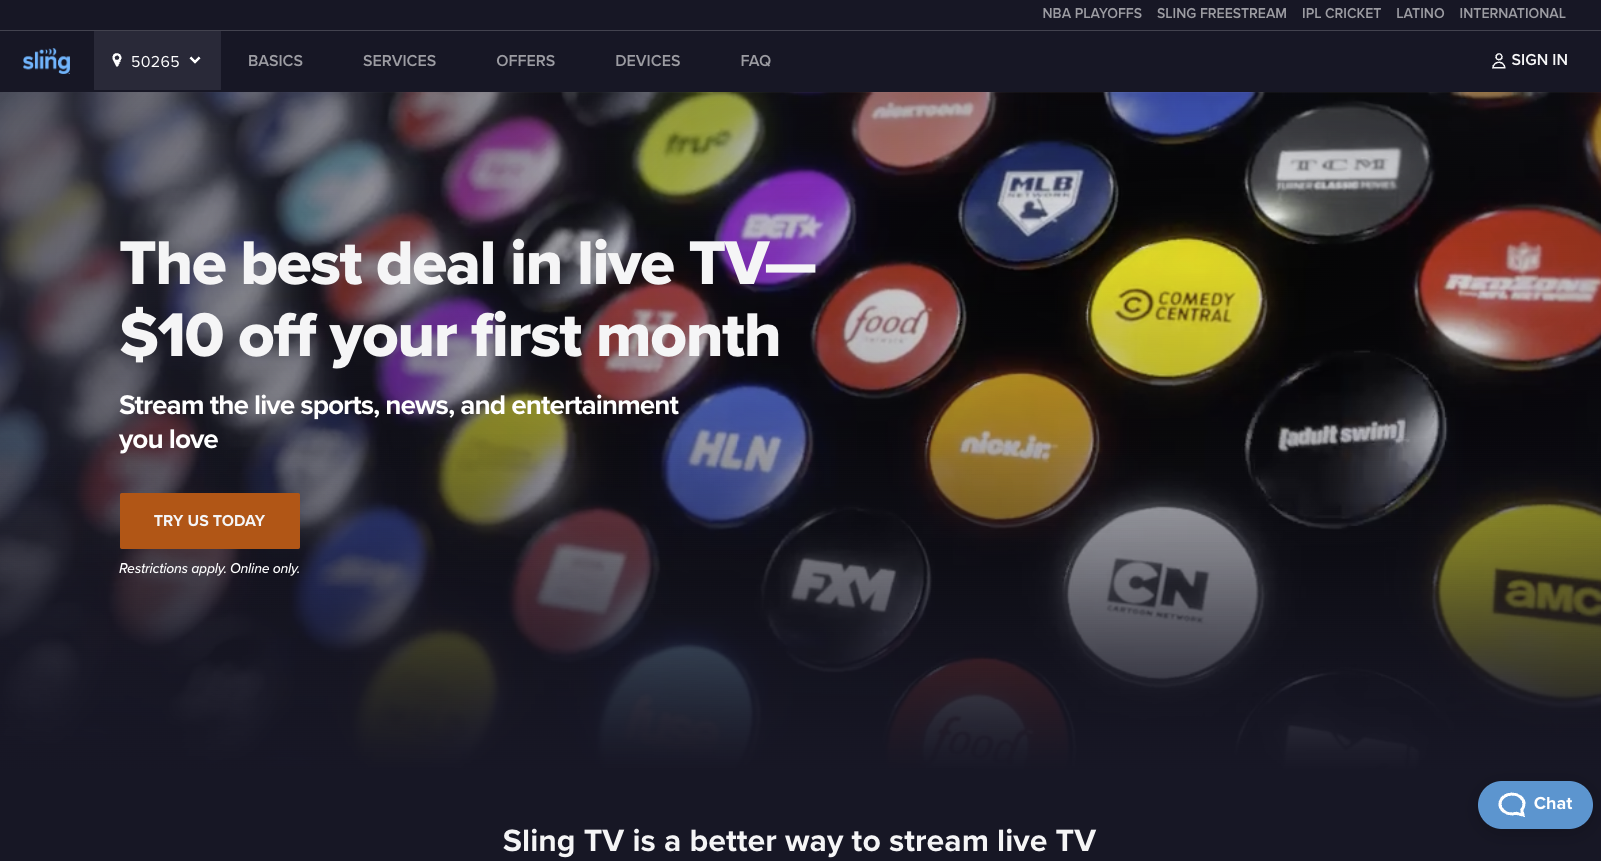 Sling TV is a popular IPTV provider that offers two different plans labeled “Sling Orange” and “Sling Blue” which both cost /month.